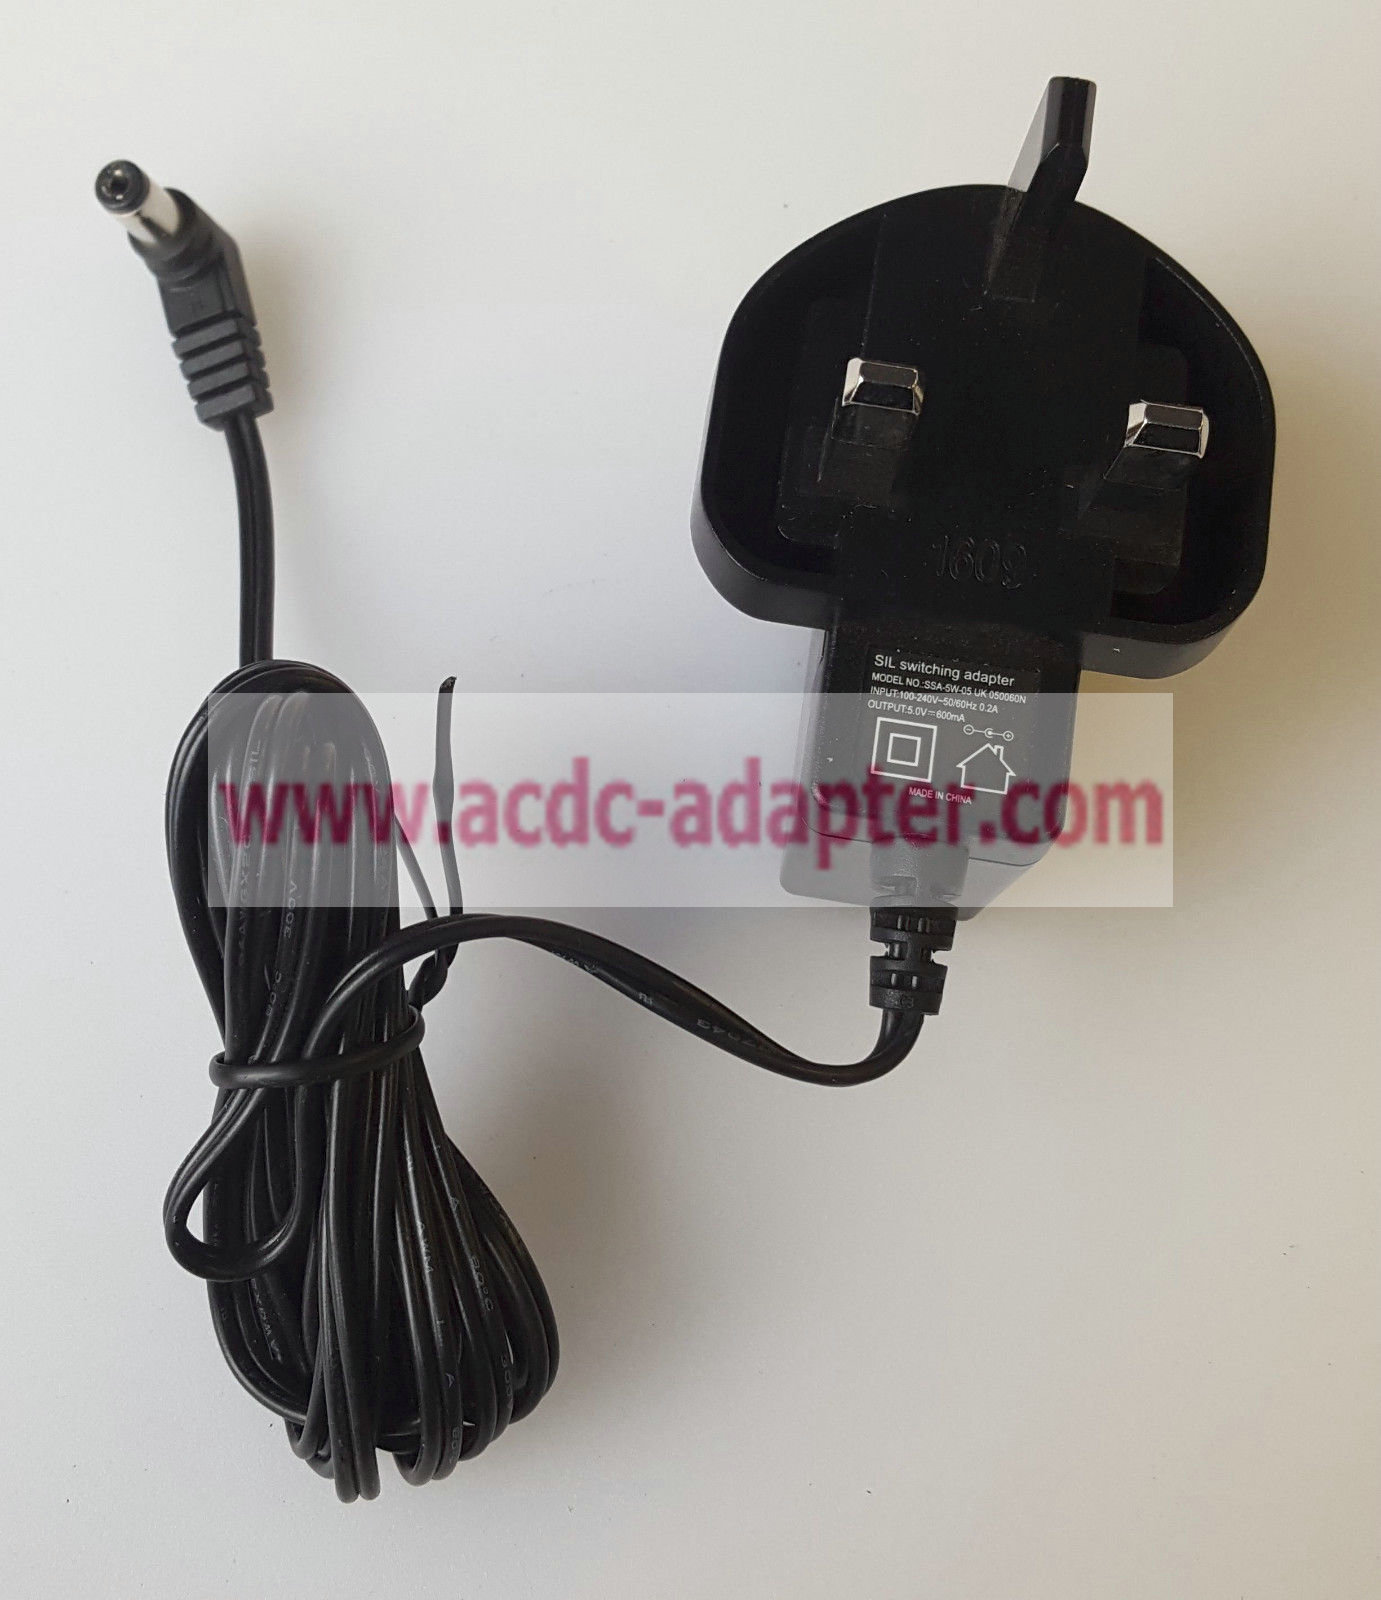 New SIL SSA-5W-05 UK 050060N AC/DC POWER SUPPLY ADAPTER 5V 600mA UK PLUG - Click Image to Close